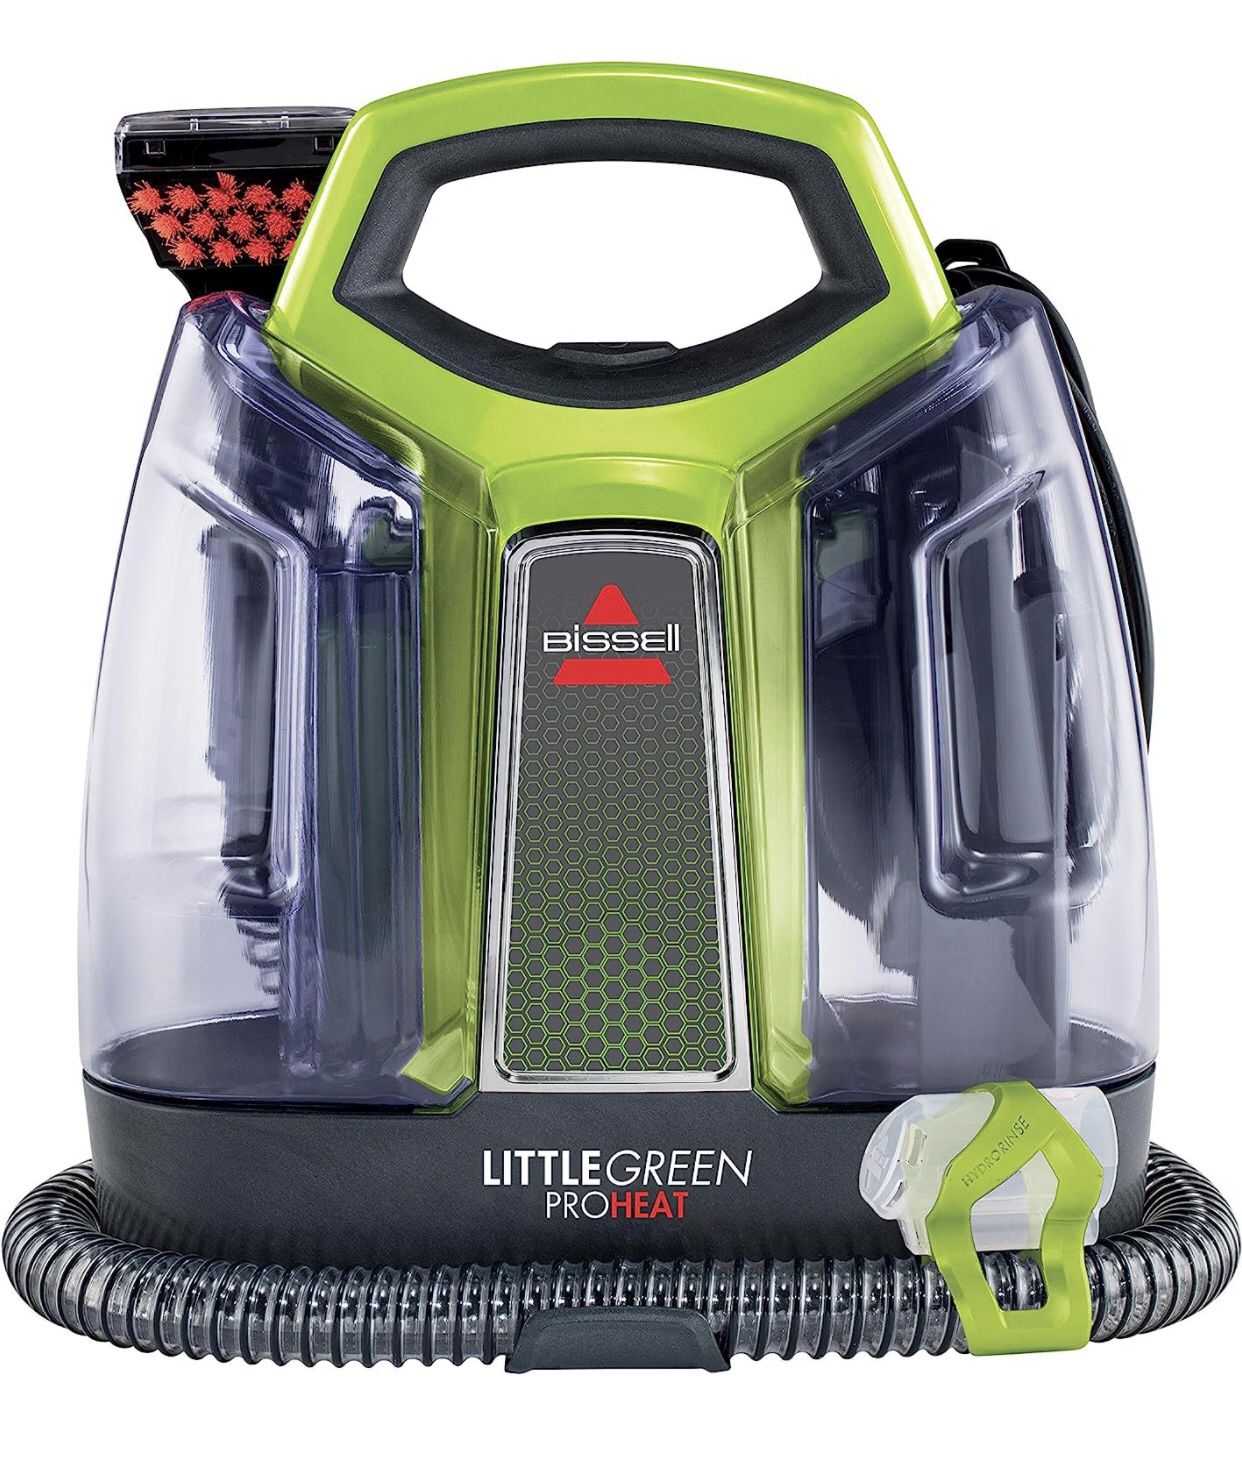 NEW! BISSELL Little Green Proheat Portable Deep Cleaner/Spot Cleaner and Car/Auto Detailer 2513E